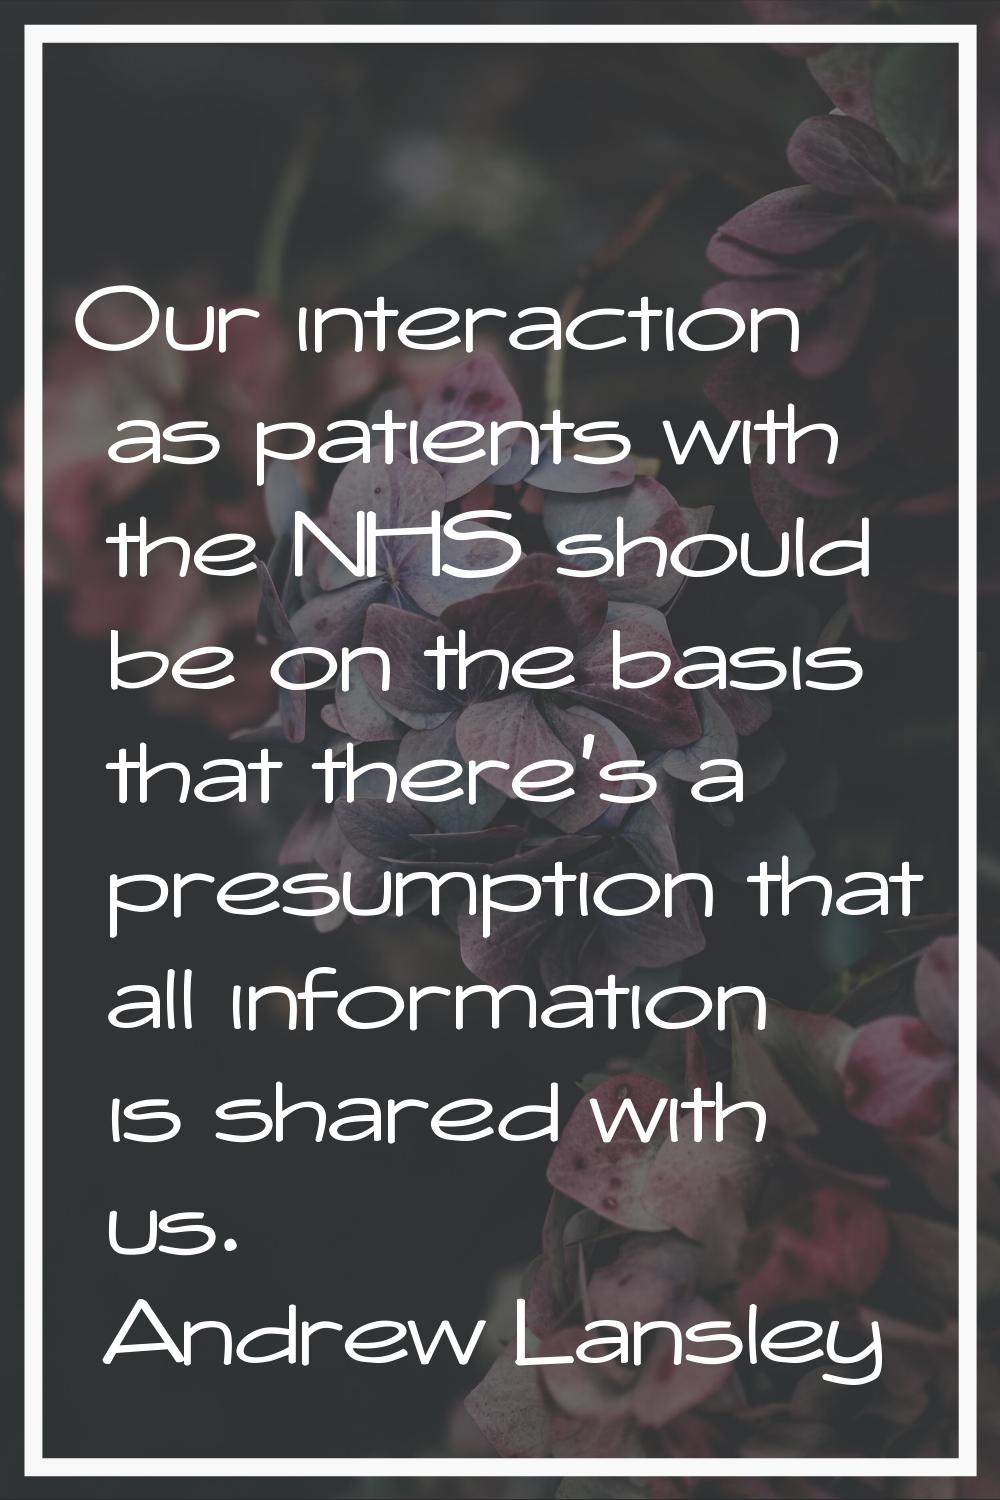 Our interaction as patients with the NHS should be on the basis that there's a presumption that all